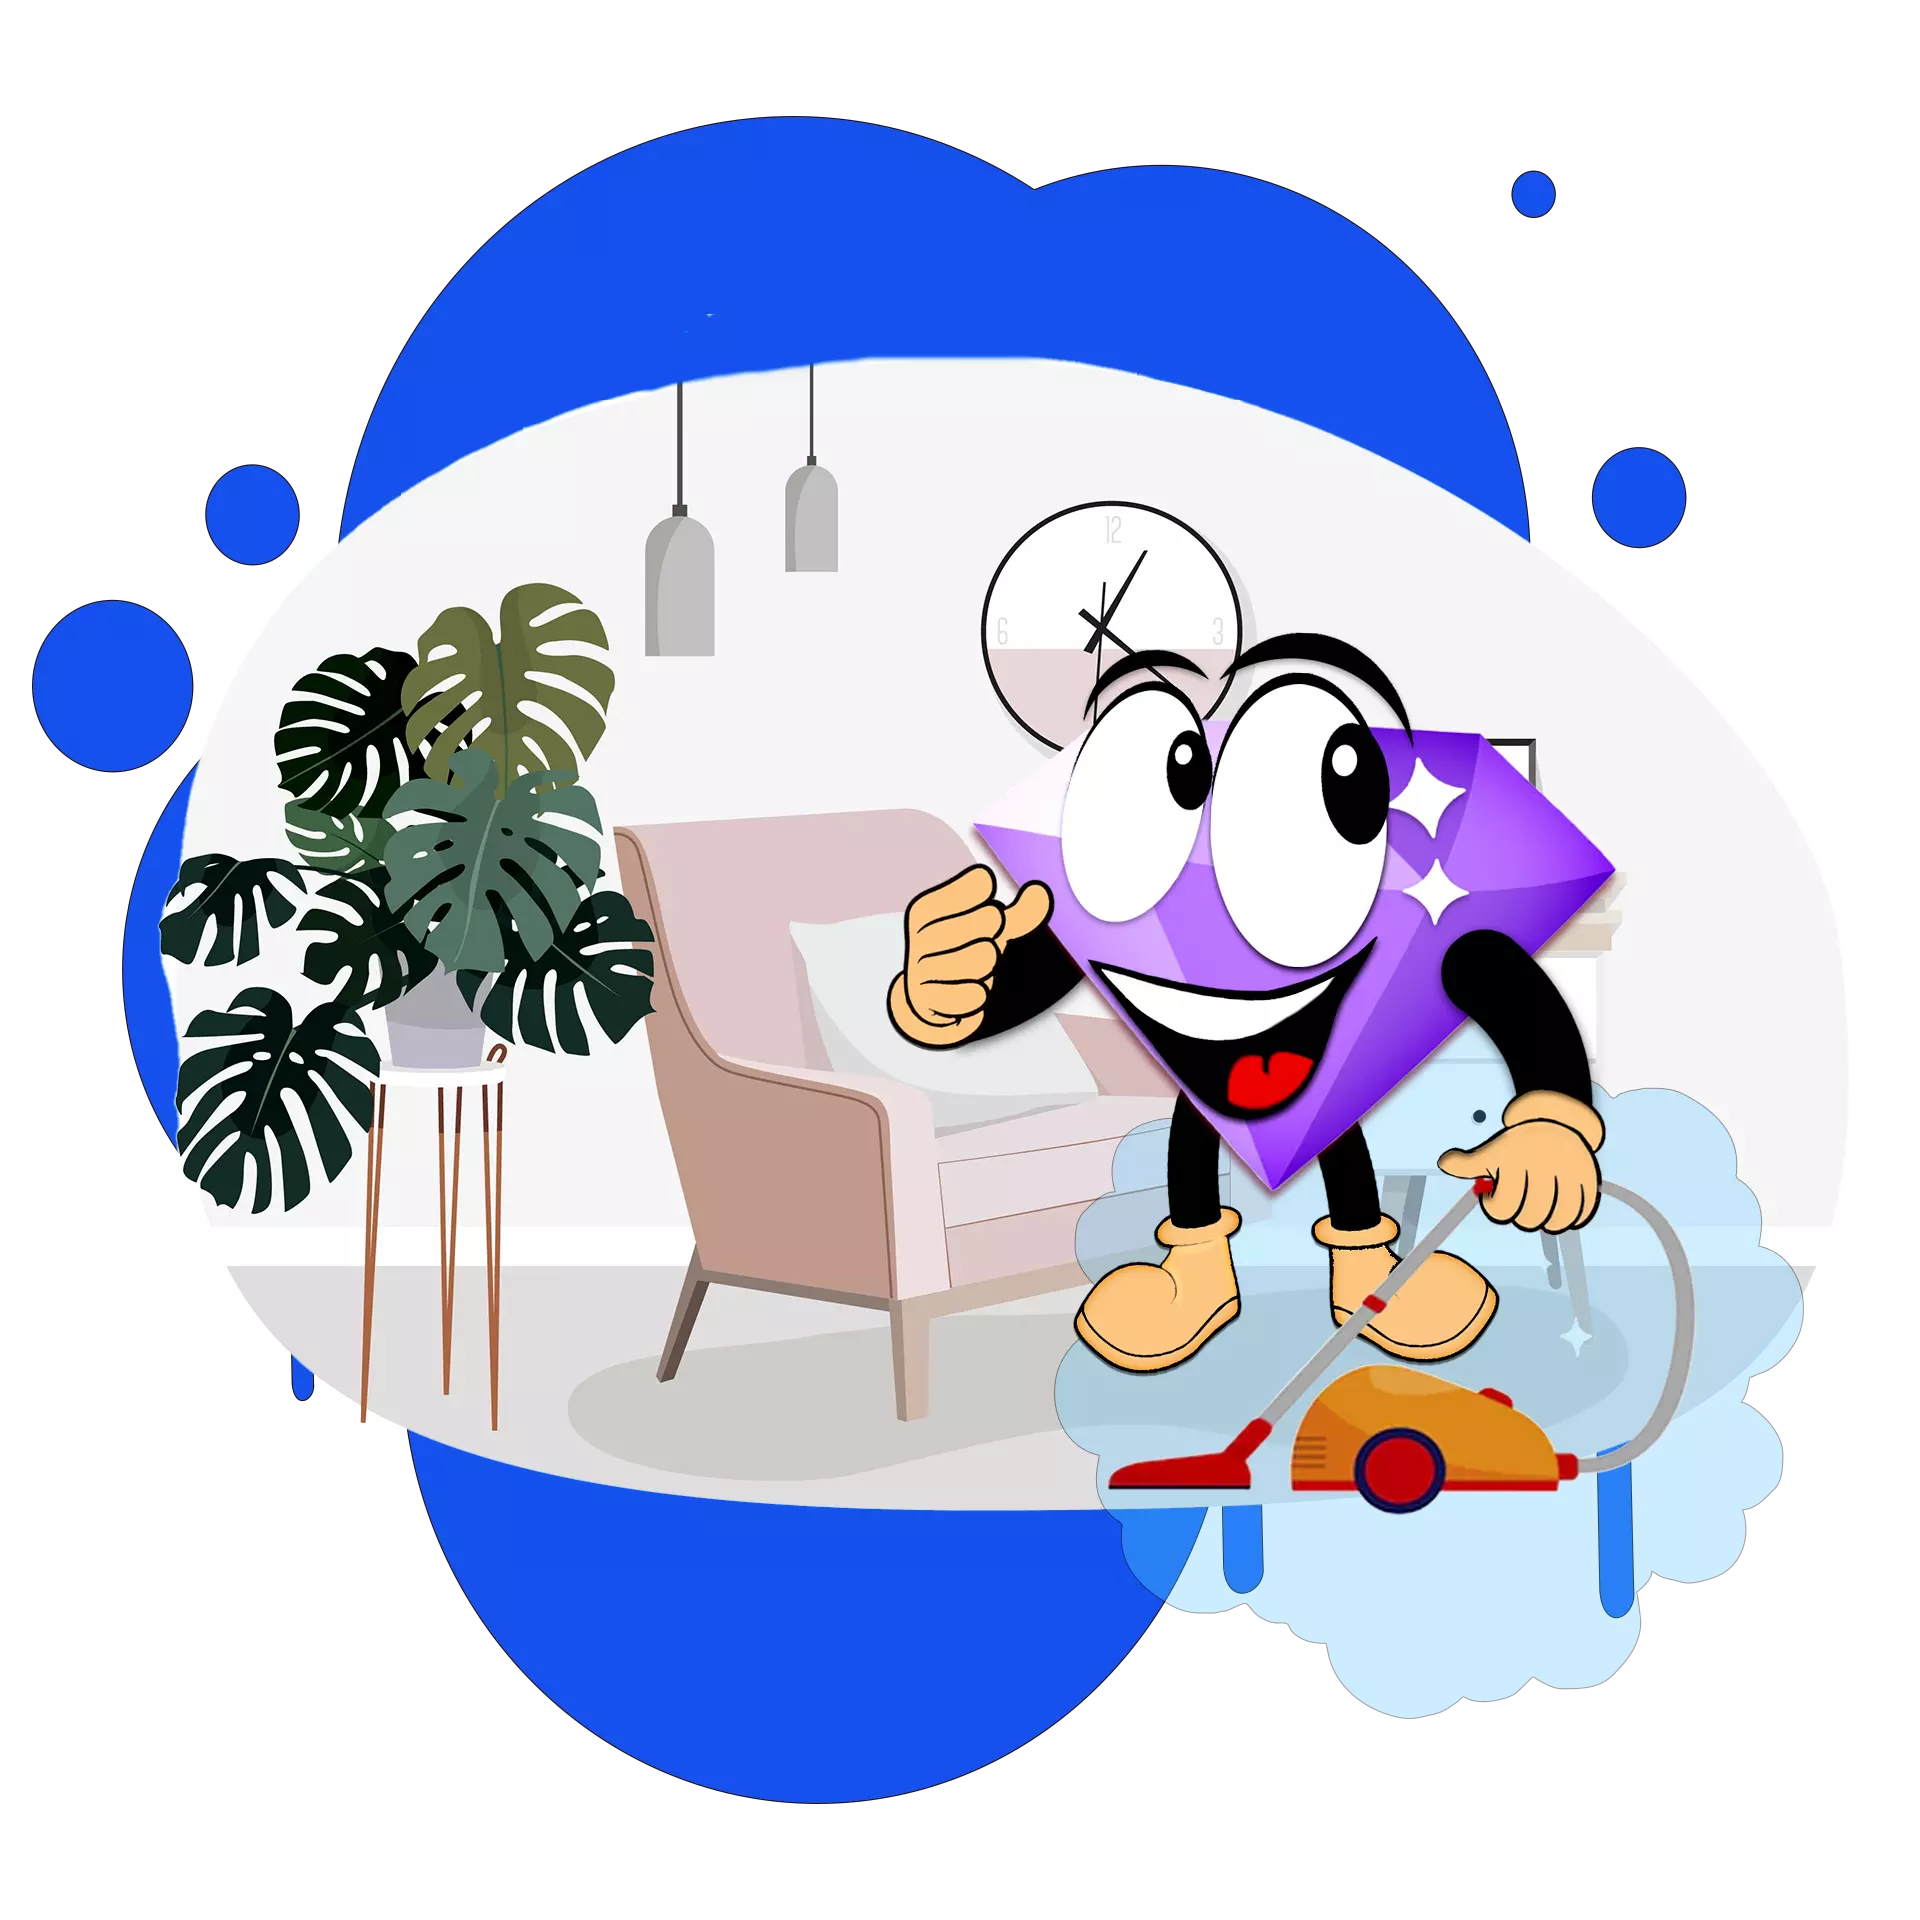 Maid Services Naples FL | House Maid Services Naples, Fort Myers Beach | Diamond Shine Cleaning Diamond Shine Cleaning Enterprises LLC